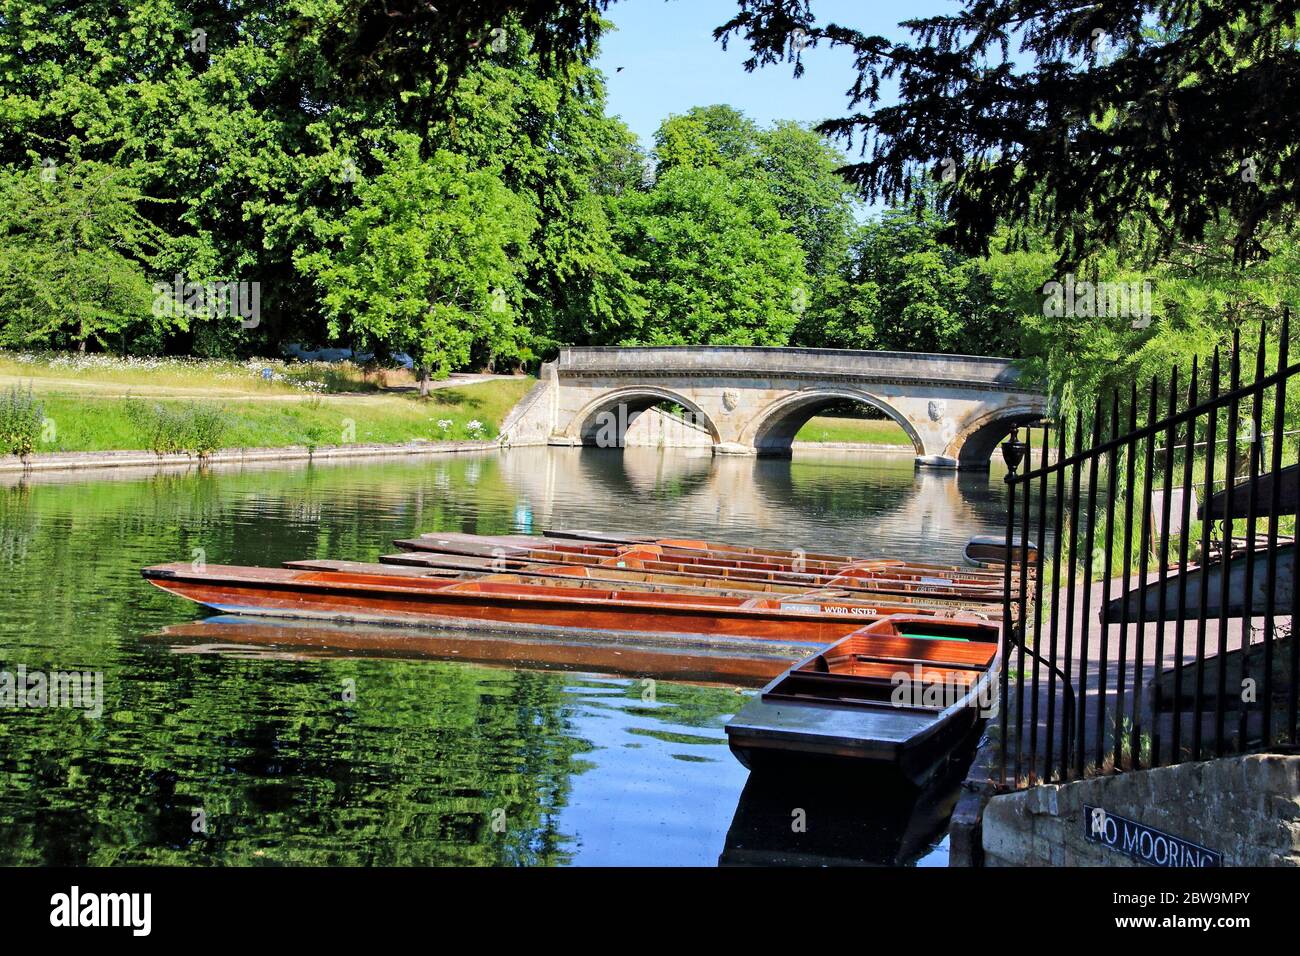 Cambridge, UK. 30th May, 2020. Punts stand empty and idle at the Mill Lane Punt Station on the River Cam.Cambridge, a city famed for its punting, cannot offer the service to tourists under current government guidelines. Scudamores, the city's largest Punt Hire Company has suspended operations and the city's many Punt Stations stand idle due to the coronavirus pandemic. Credit: SOPA Images Limited/Alamy Live News Stock Photo